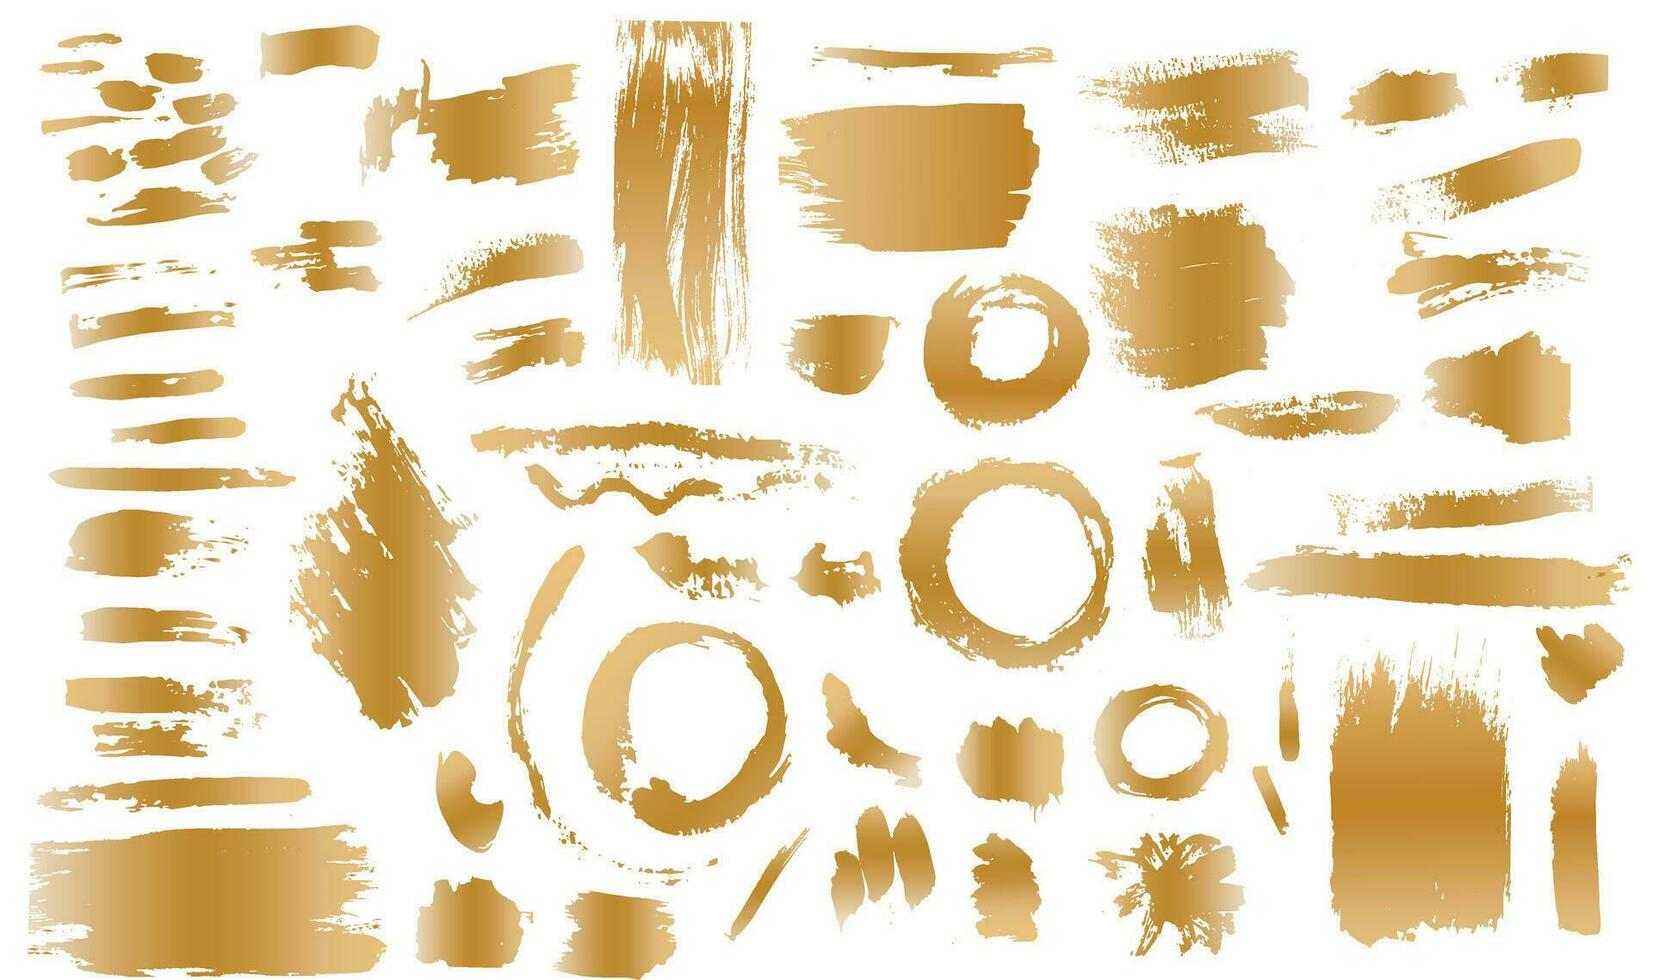 Set of brass Gold artistic brush strokes features sponge stamps, splashes, dry brush marks, and pastel pencil textures. vector